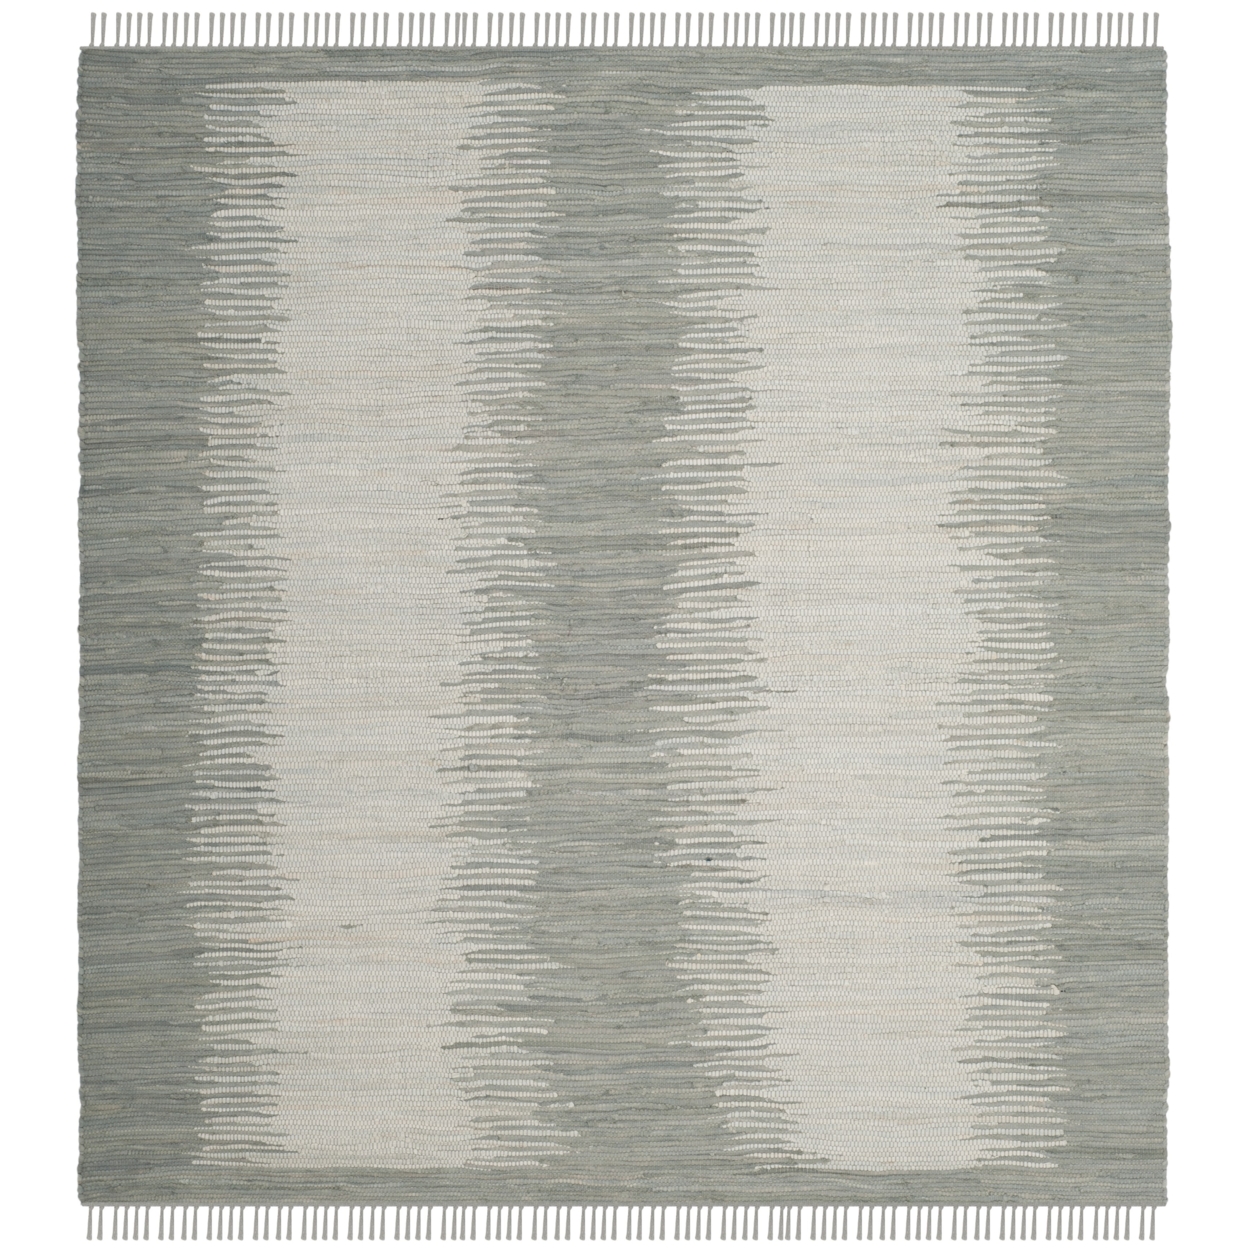 SAFAVIEH Montauk Collection MTK718A Handwoven Grey Rug - 6' Square